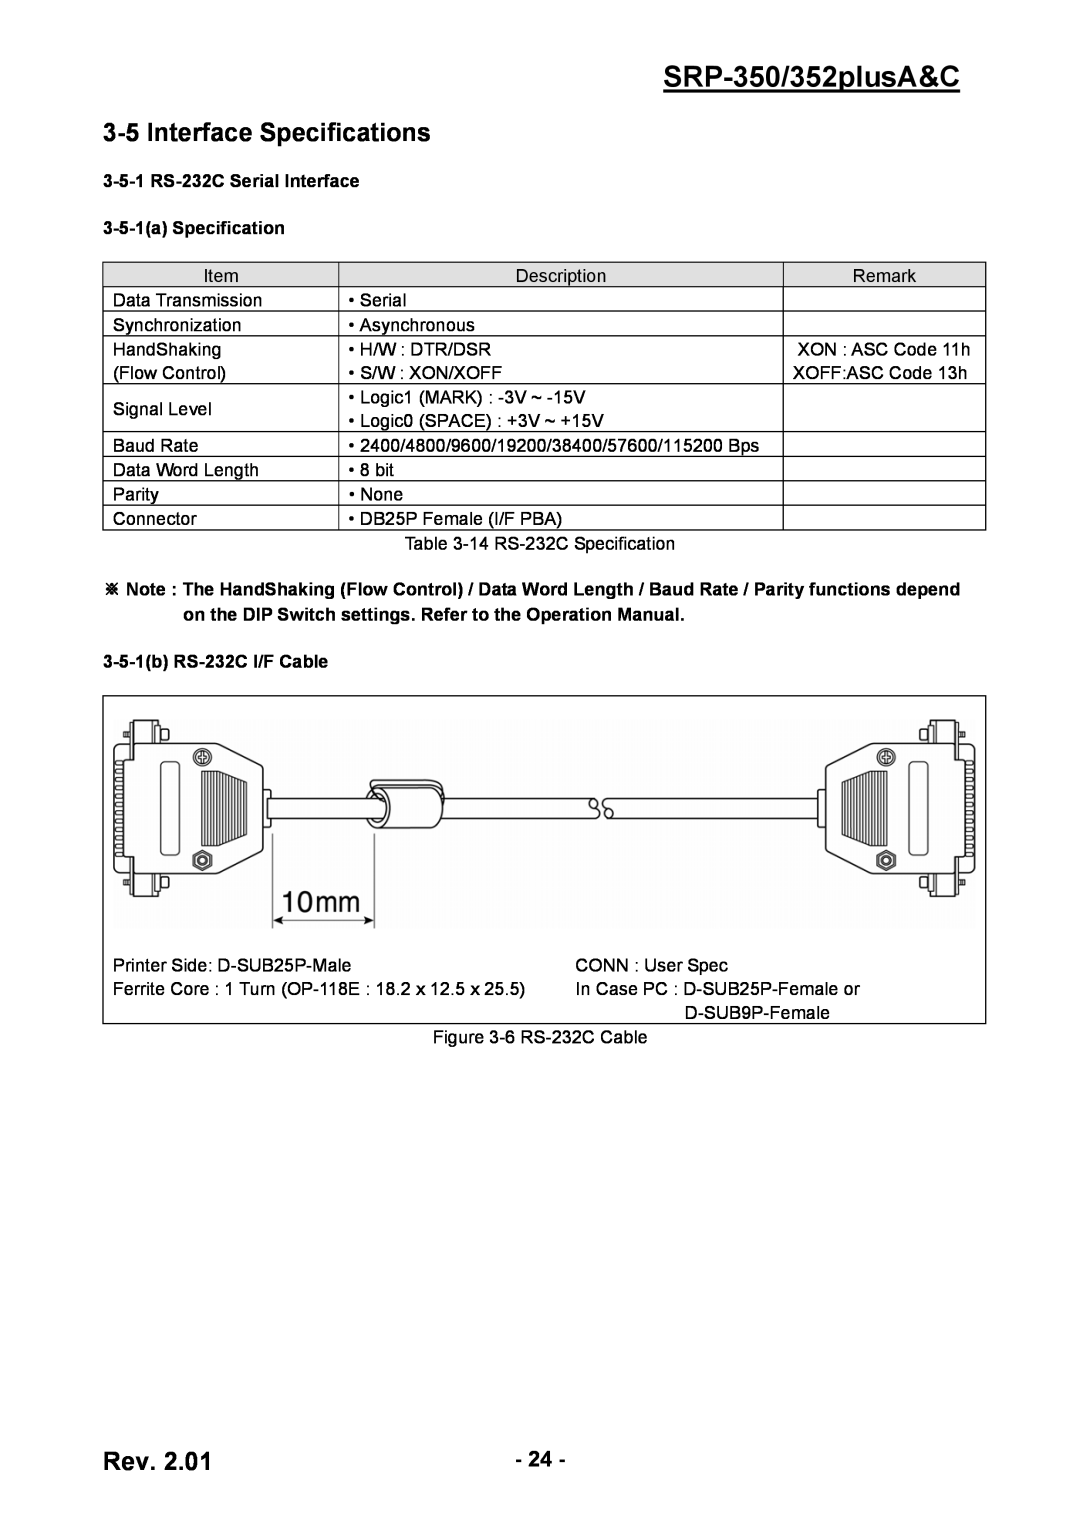 BIXOLON service manual Interface Specifications, SRP-350/352plusA&C, 3-5-1 RS-232C Serial Interface 3-5-1a Specification 